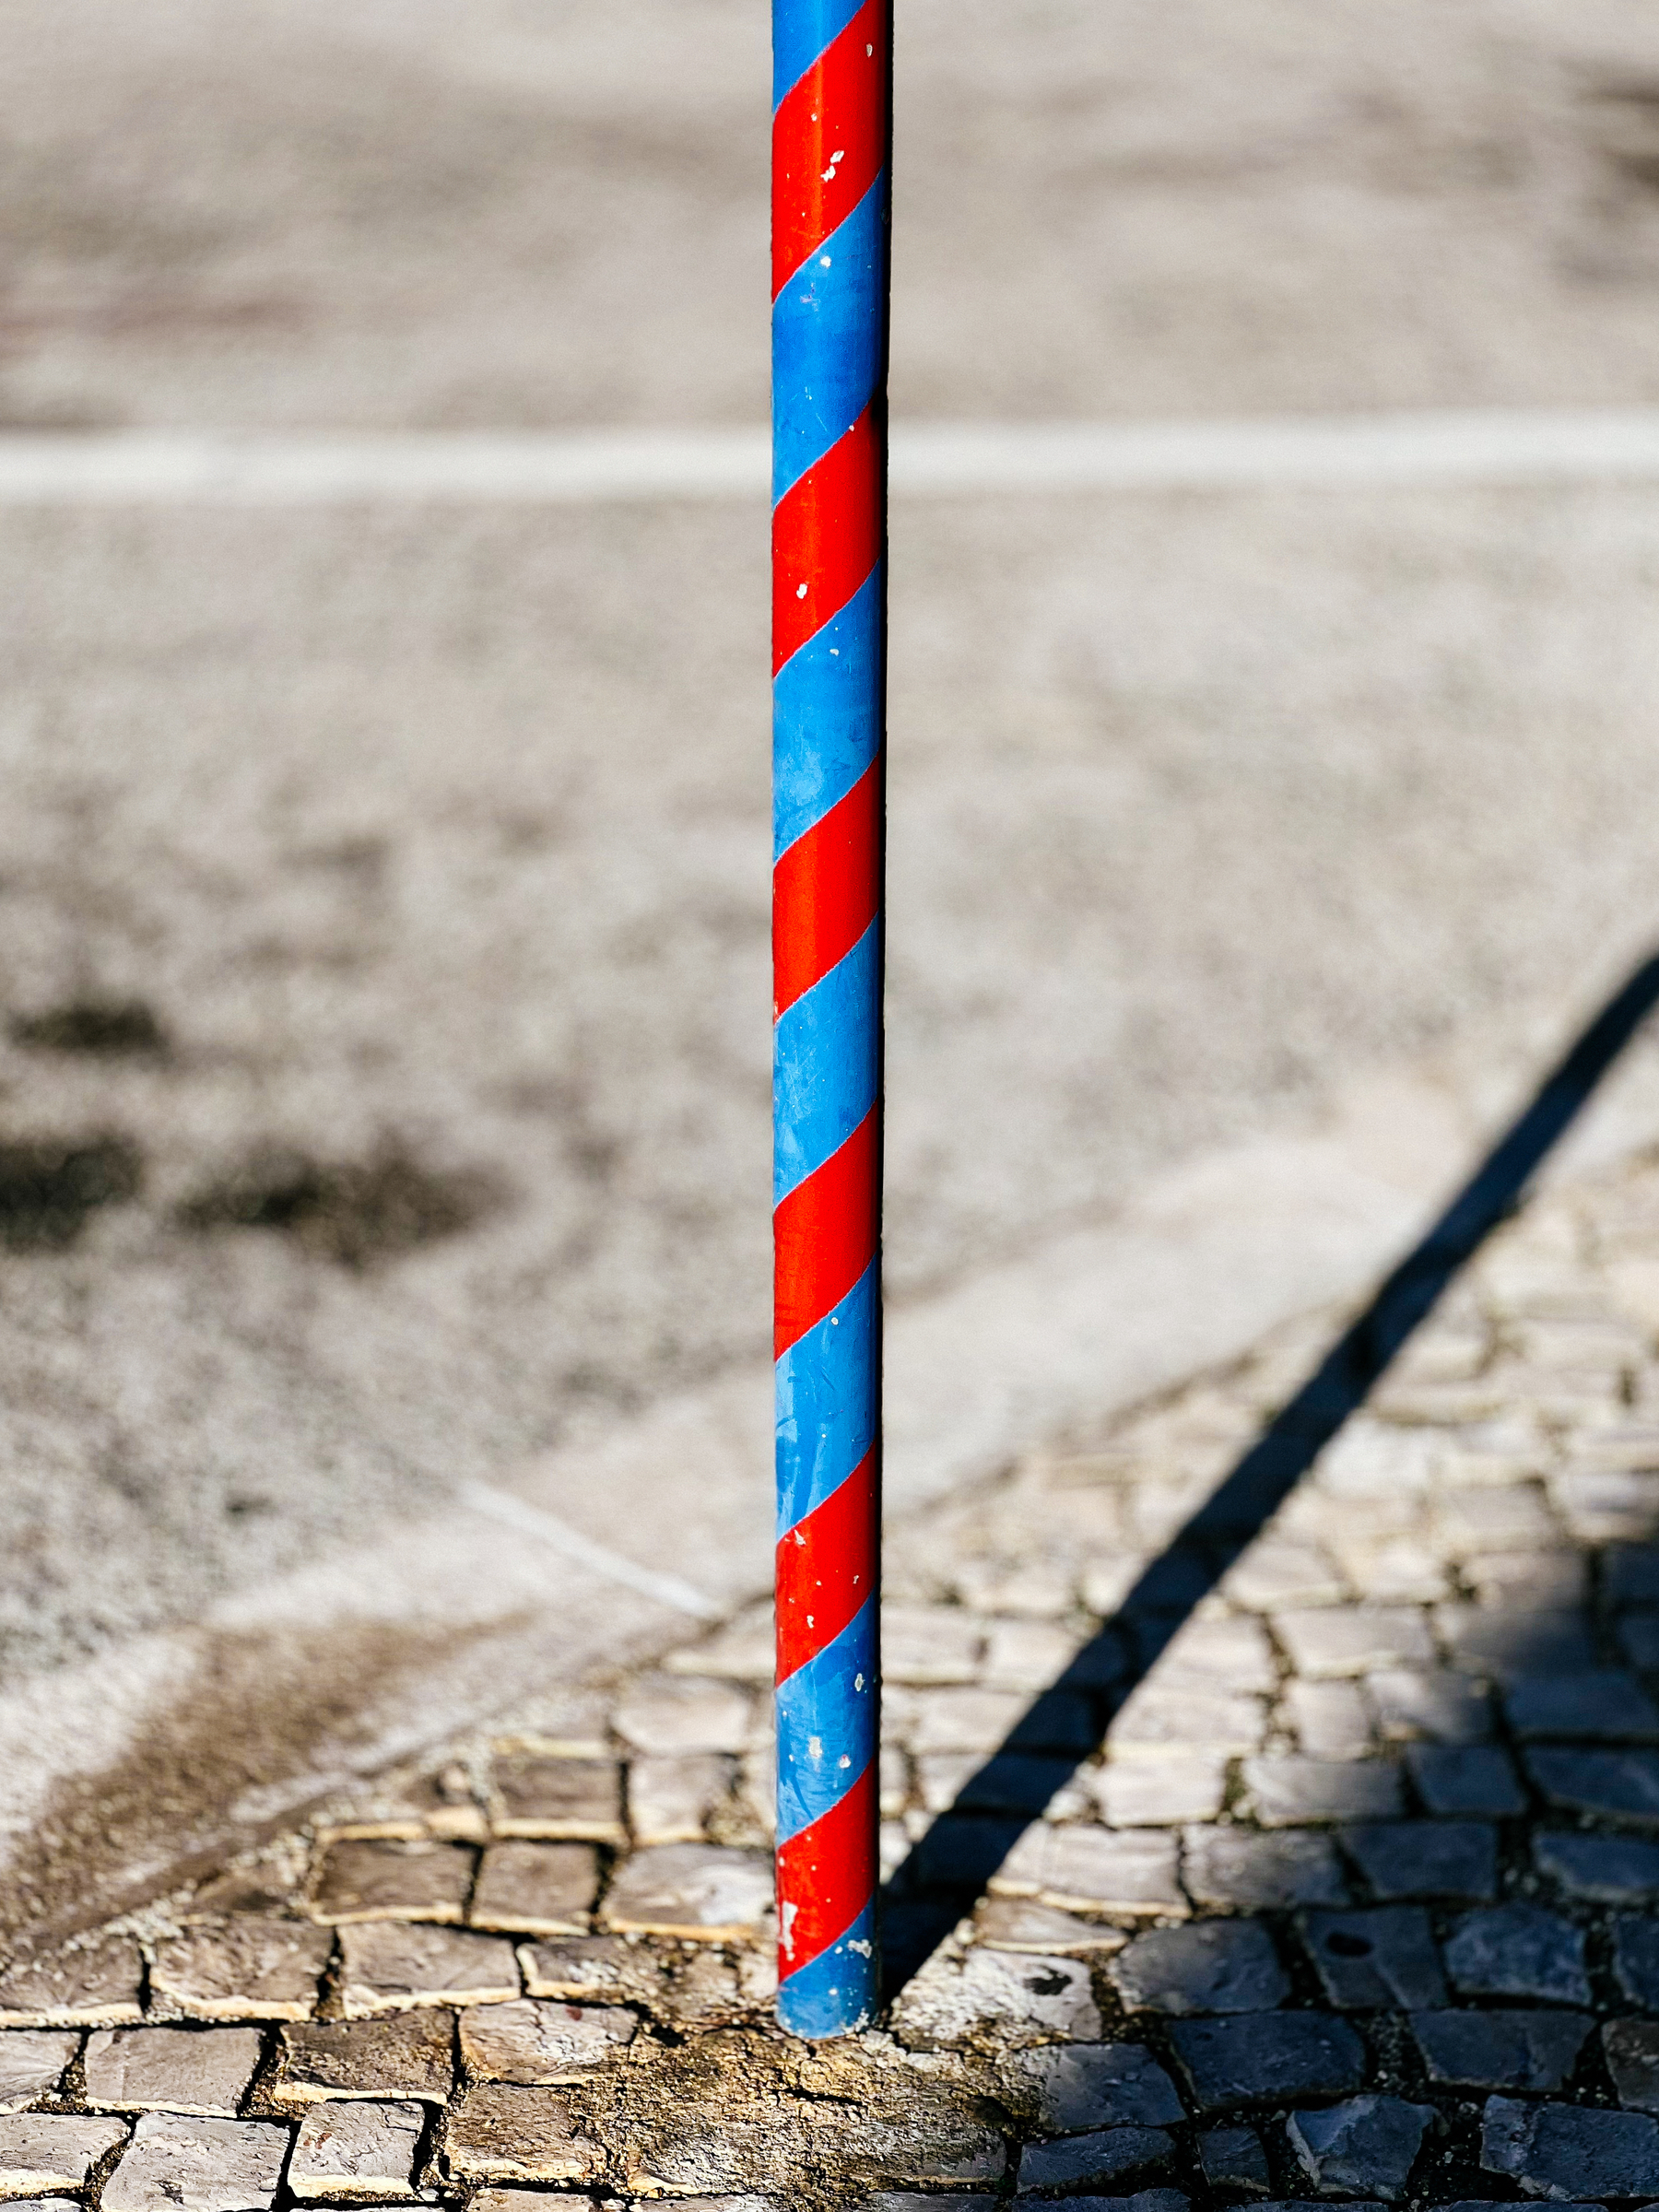 A red and blue pole.